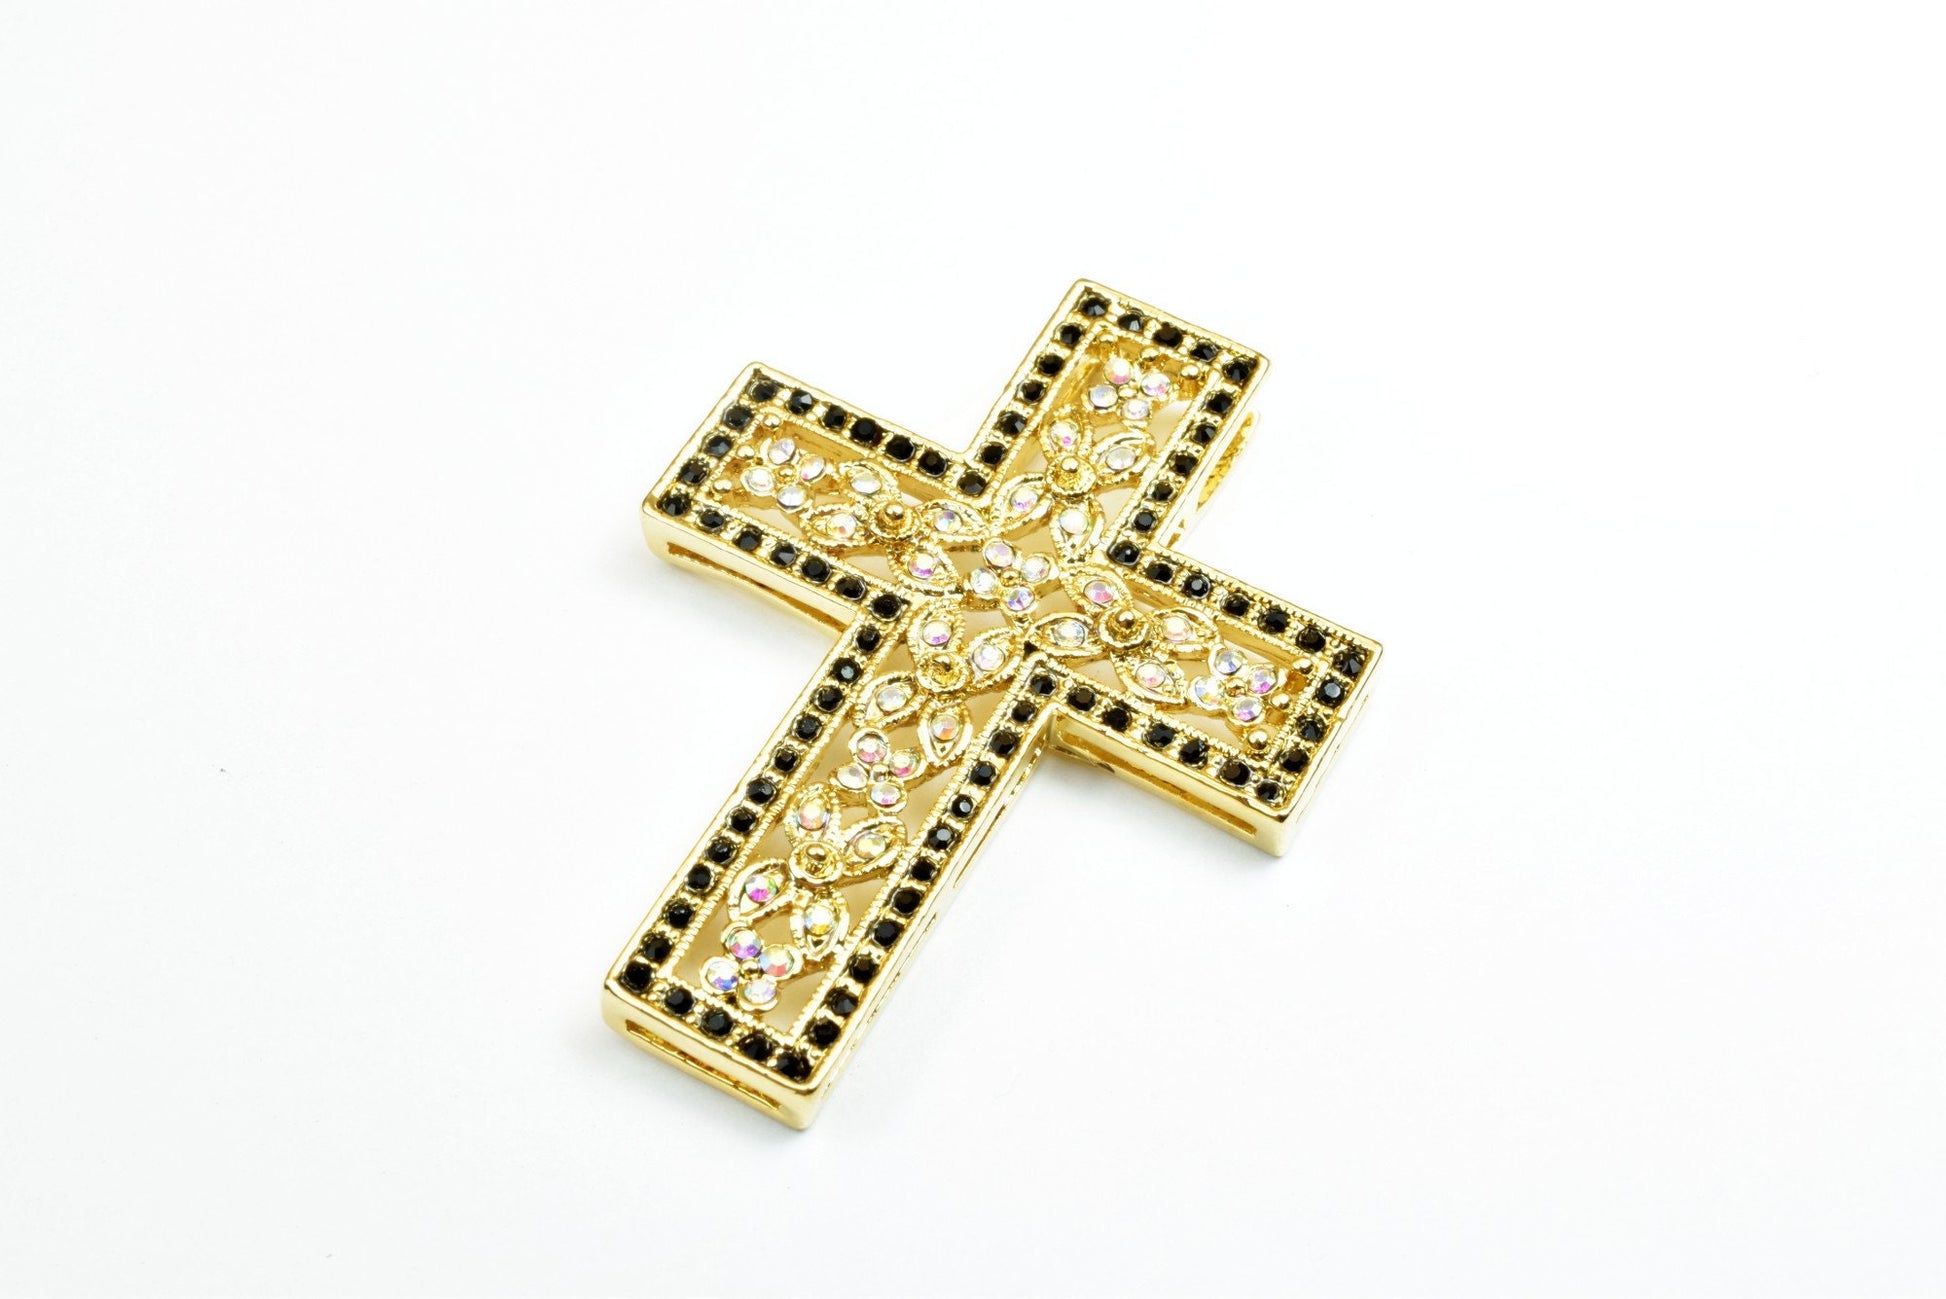 18KT Gold Filled Clear & Black/Rose Colored Cubic Zirconia Beautiful Cross Pendants Size 52x40mm Christian Religious Rosary Jewelry Making